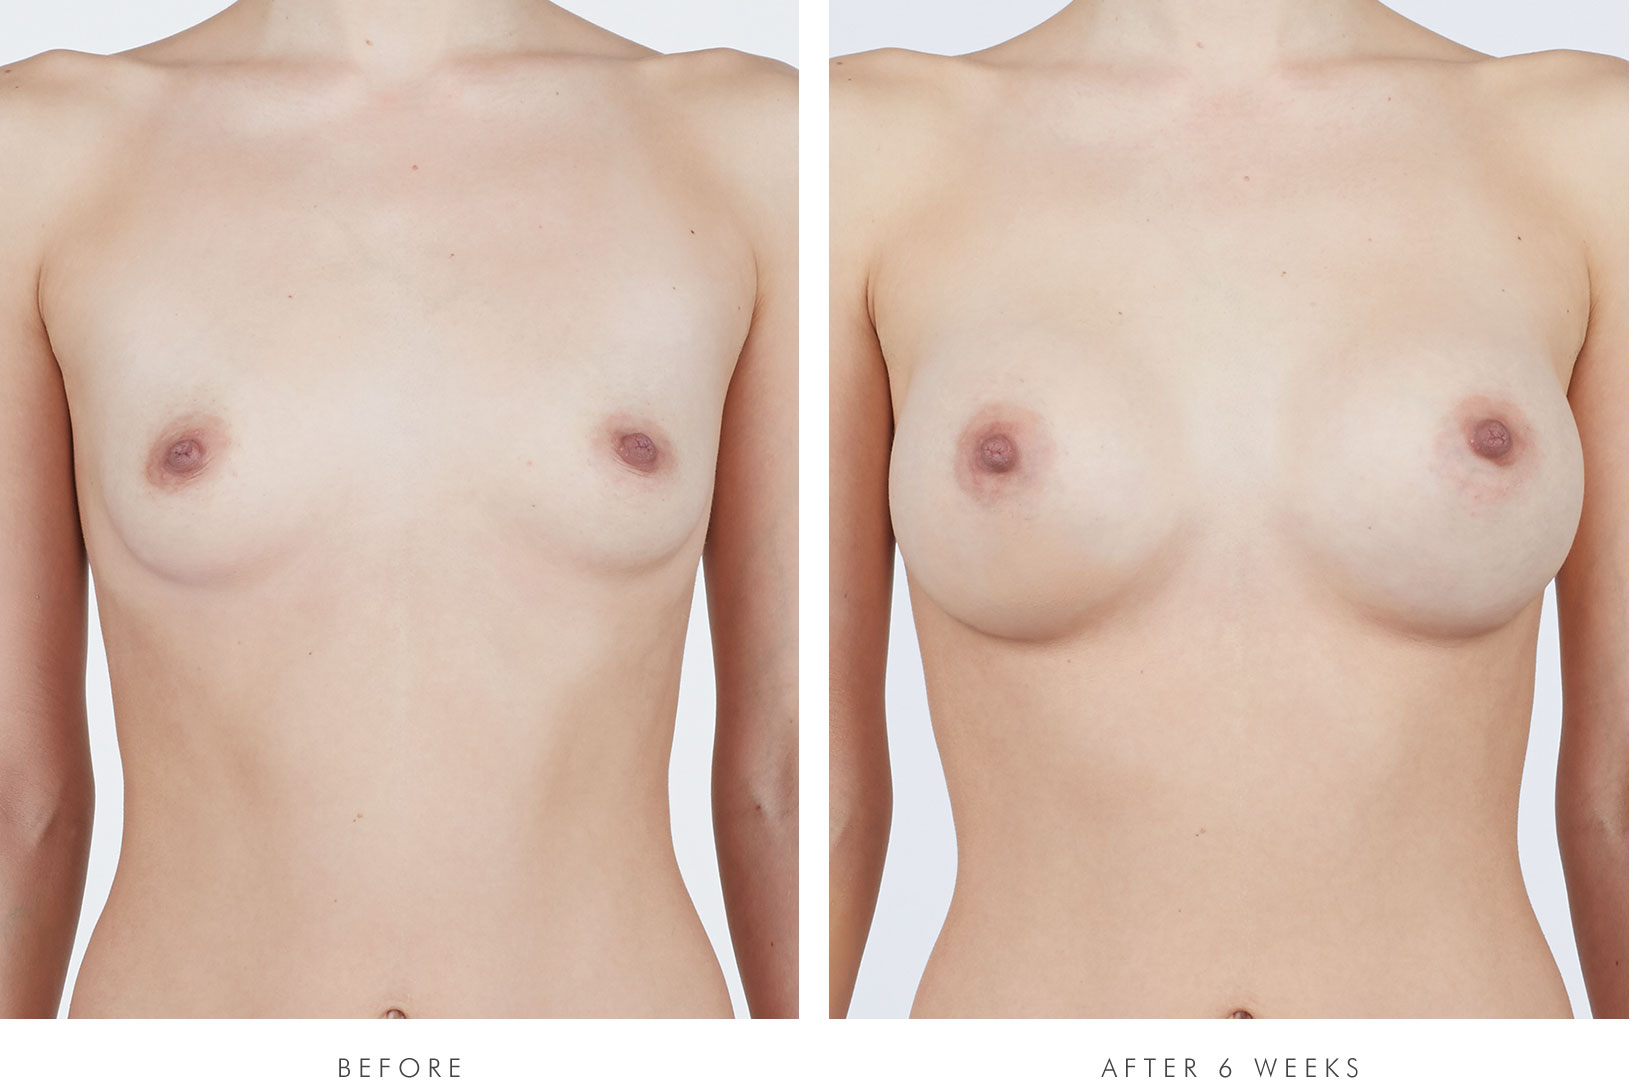 Nikki, front view, before breast augmentation / Nikki, front view, 6 weeks after breast augmentation with NATRELLE® INSPIRA® Style SRF-415 breast implants